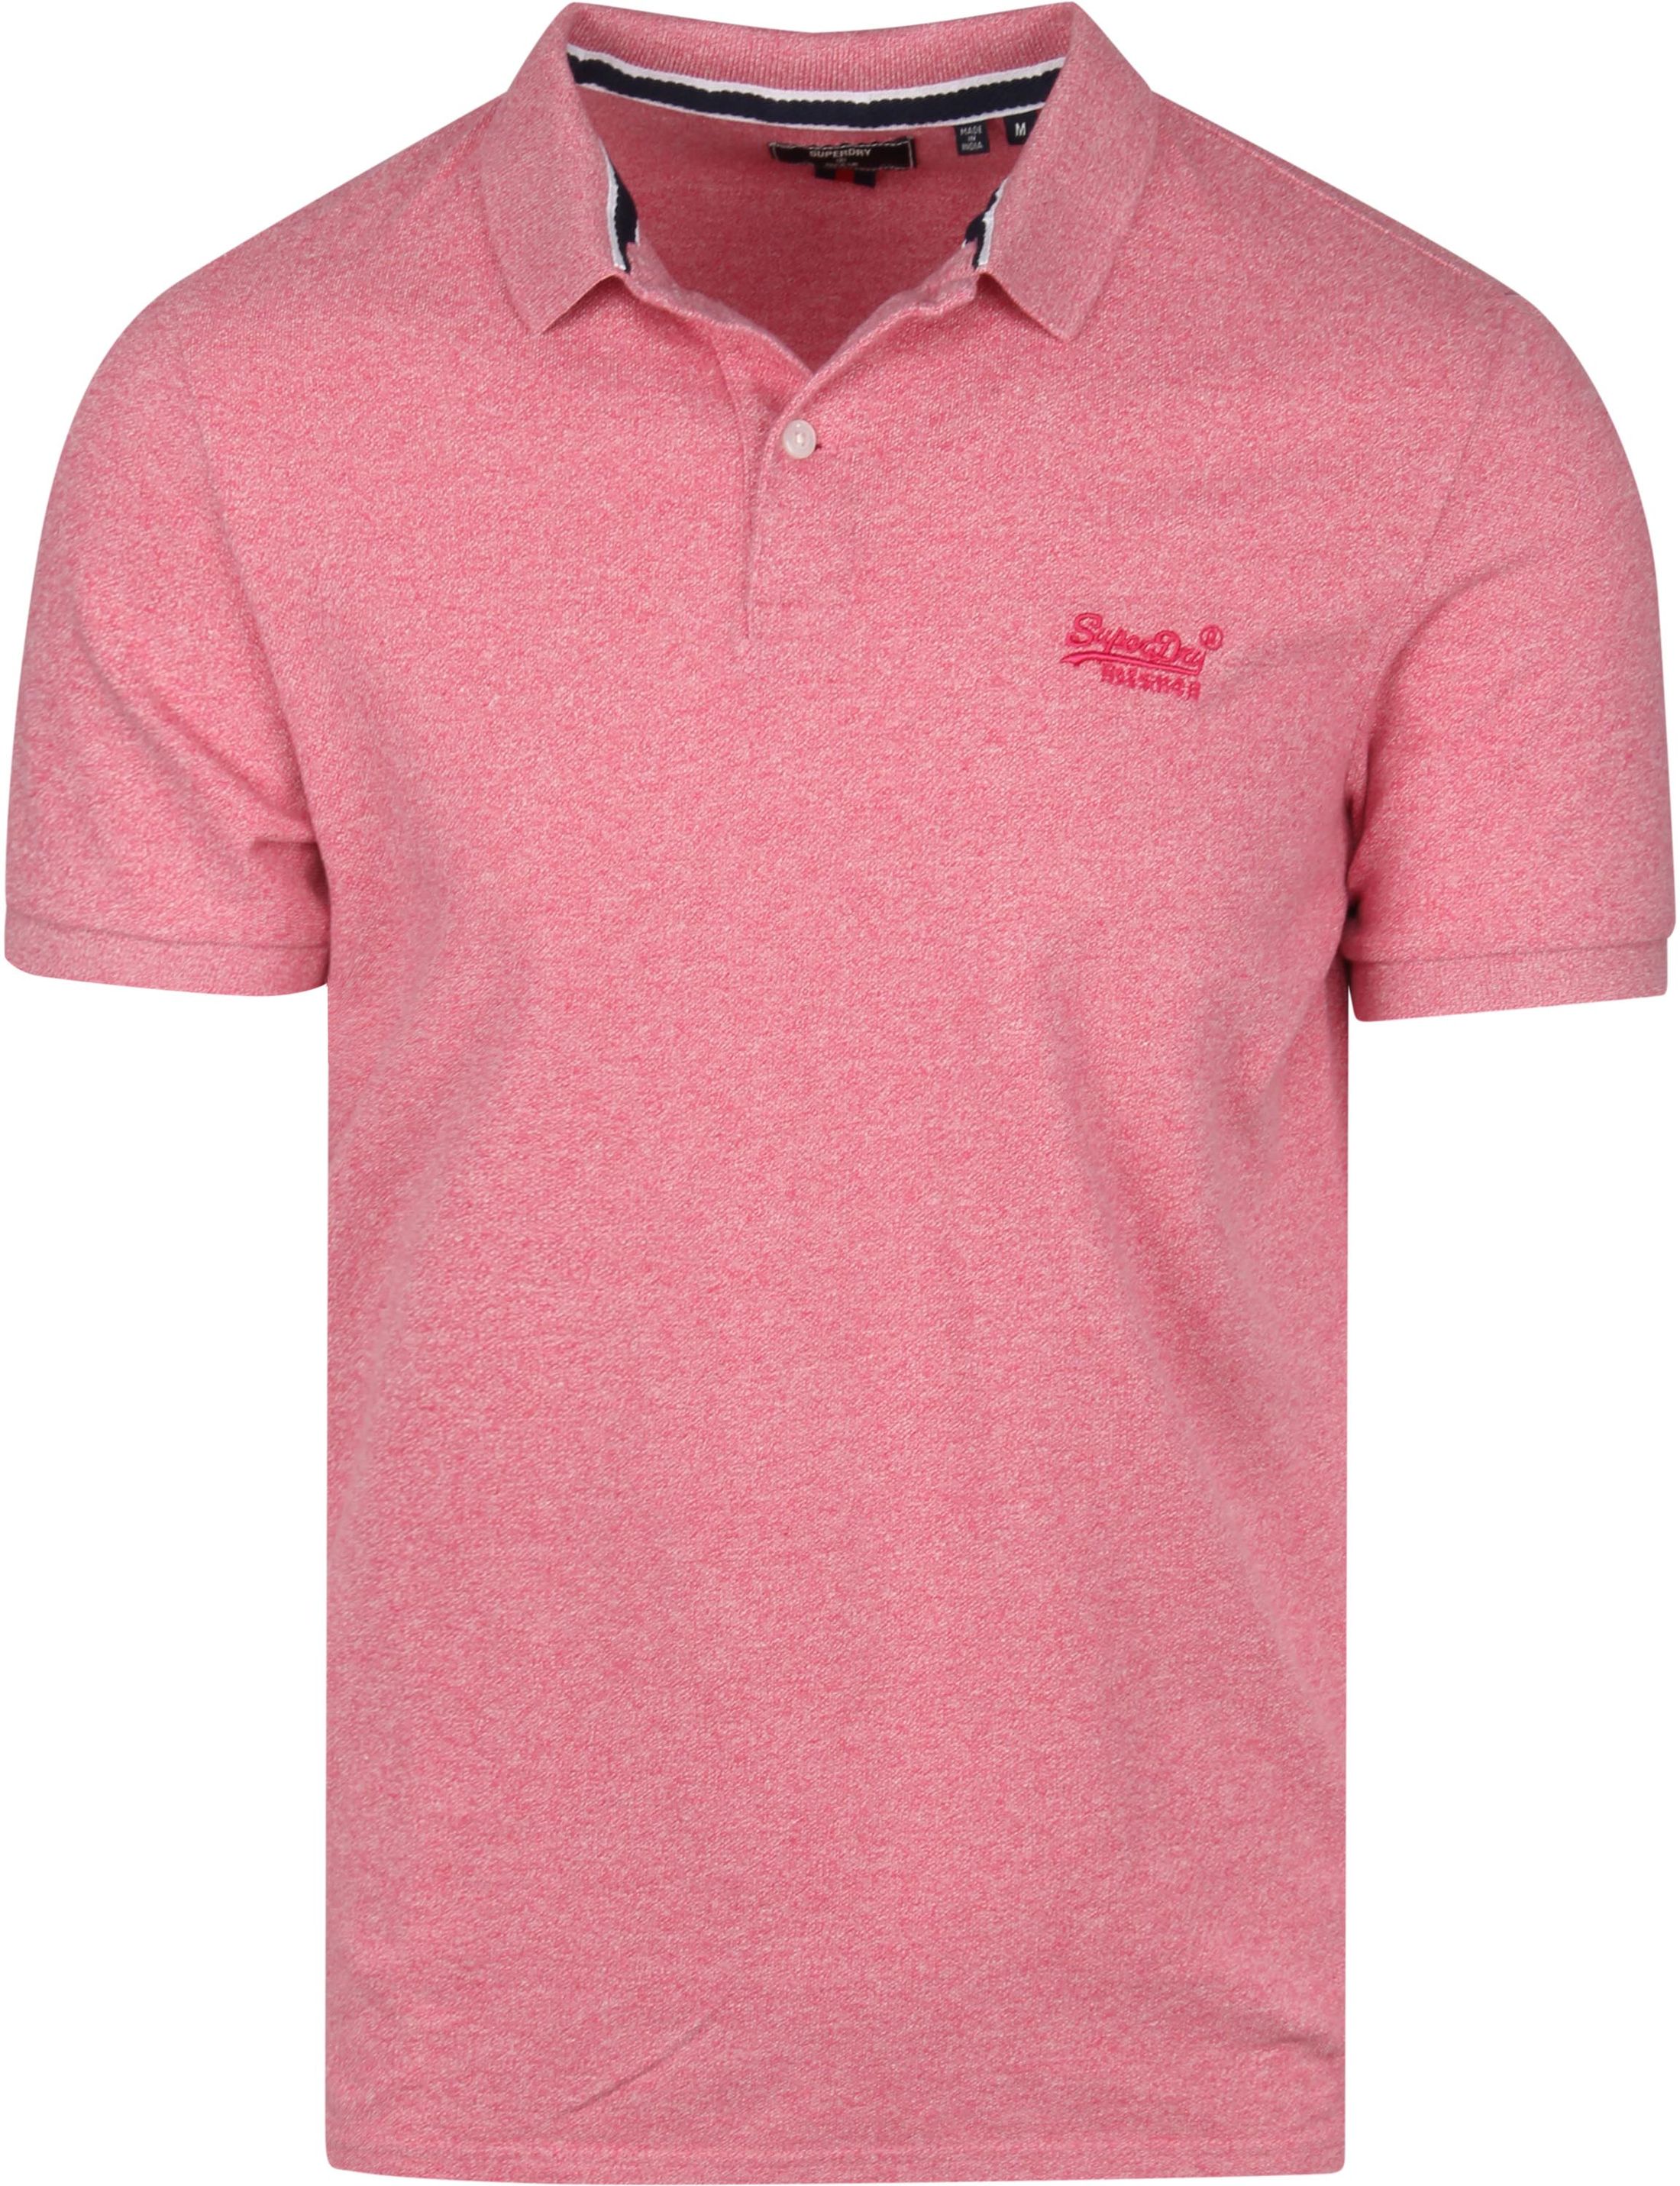 Superdry Classic Polo Shirt Pink size 3XL